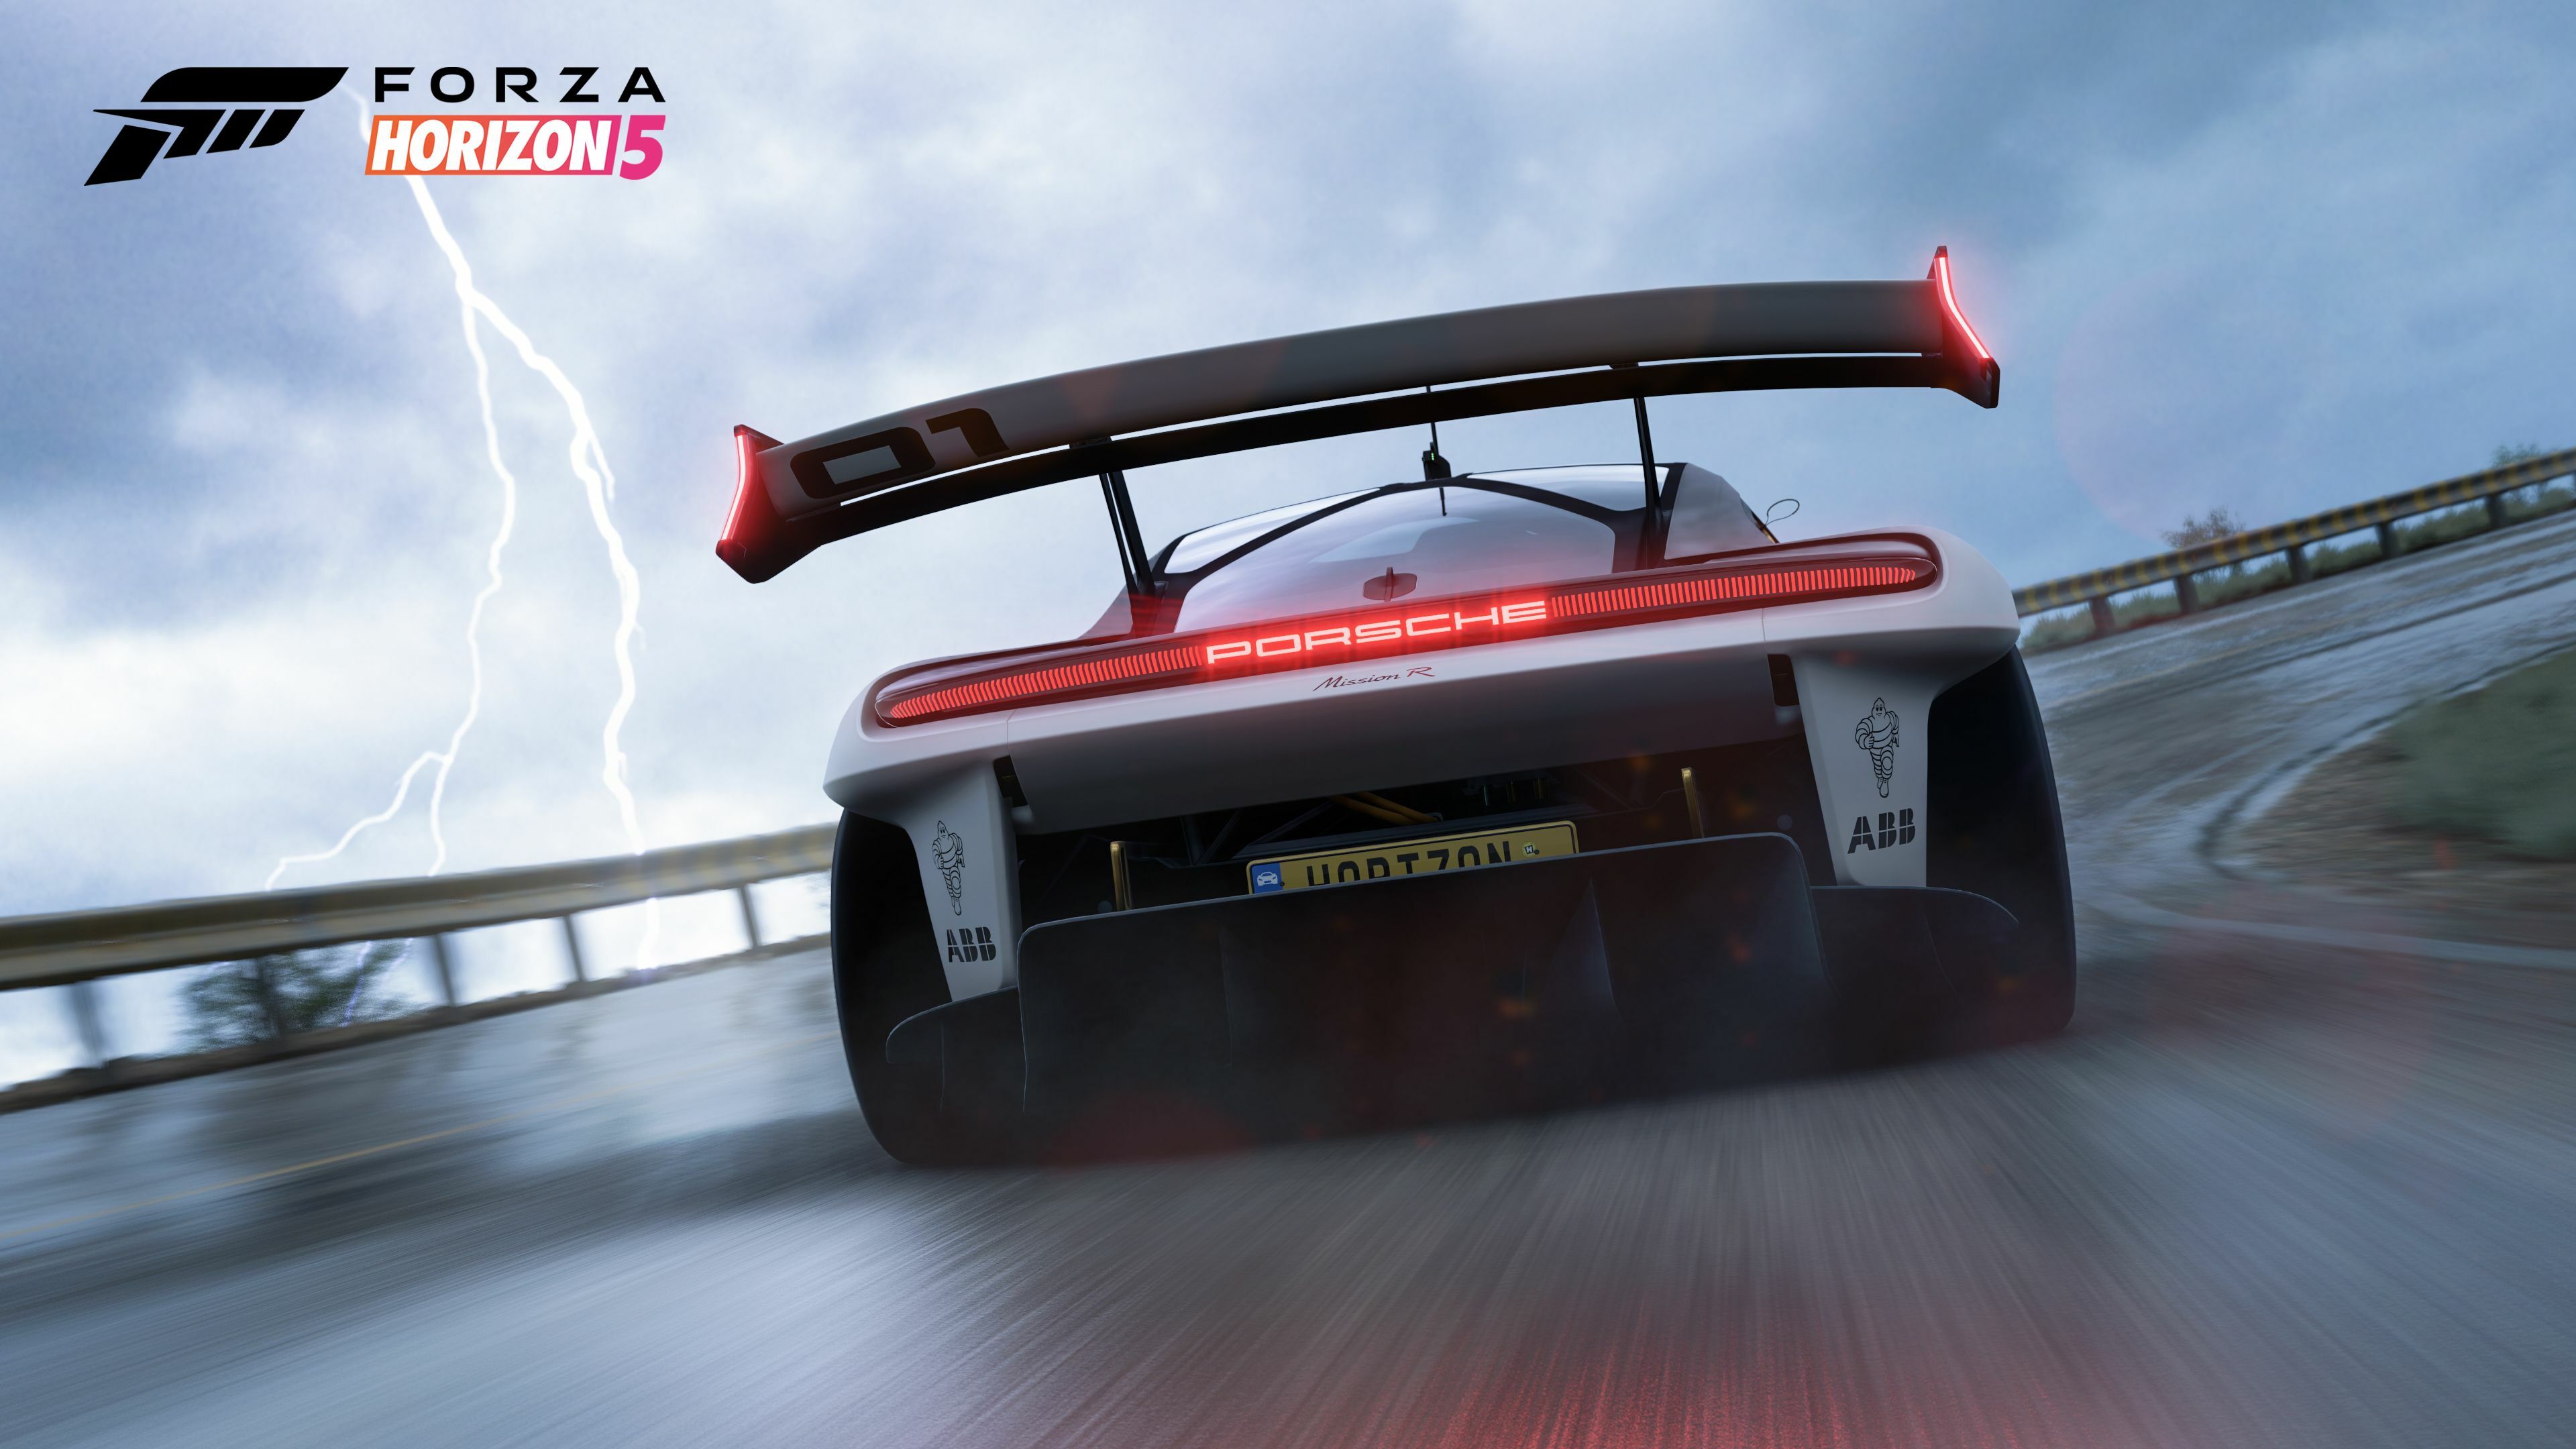 Forza Horizon 2 Download Full Game PC For Free - Gaming Beasts